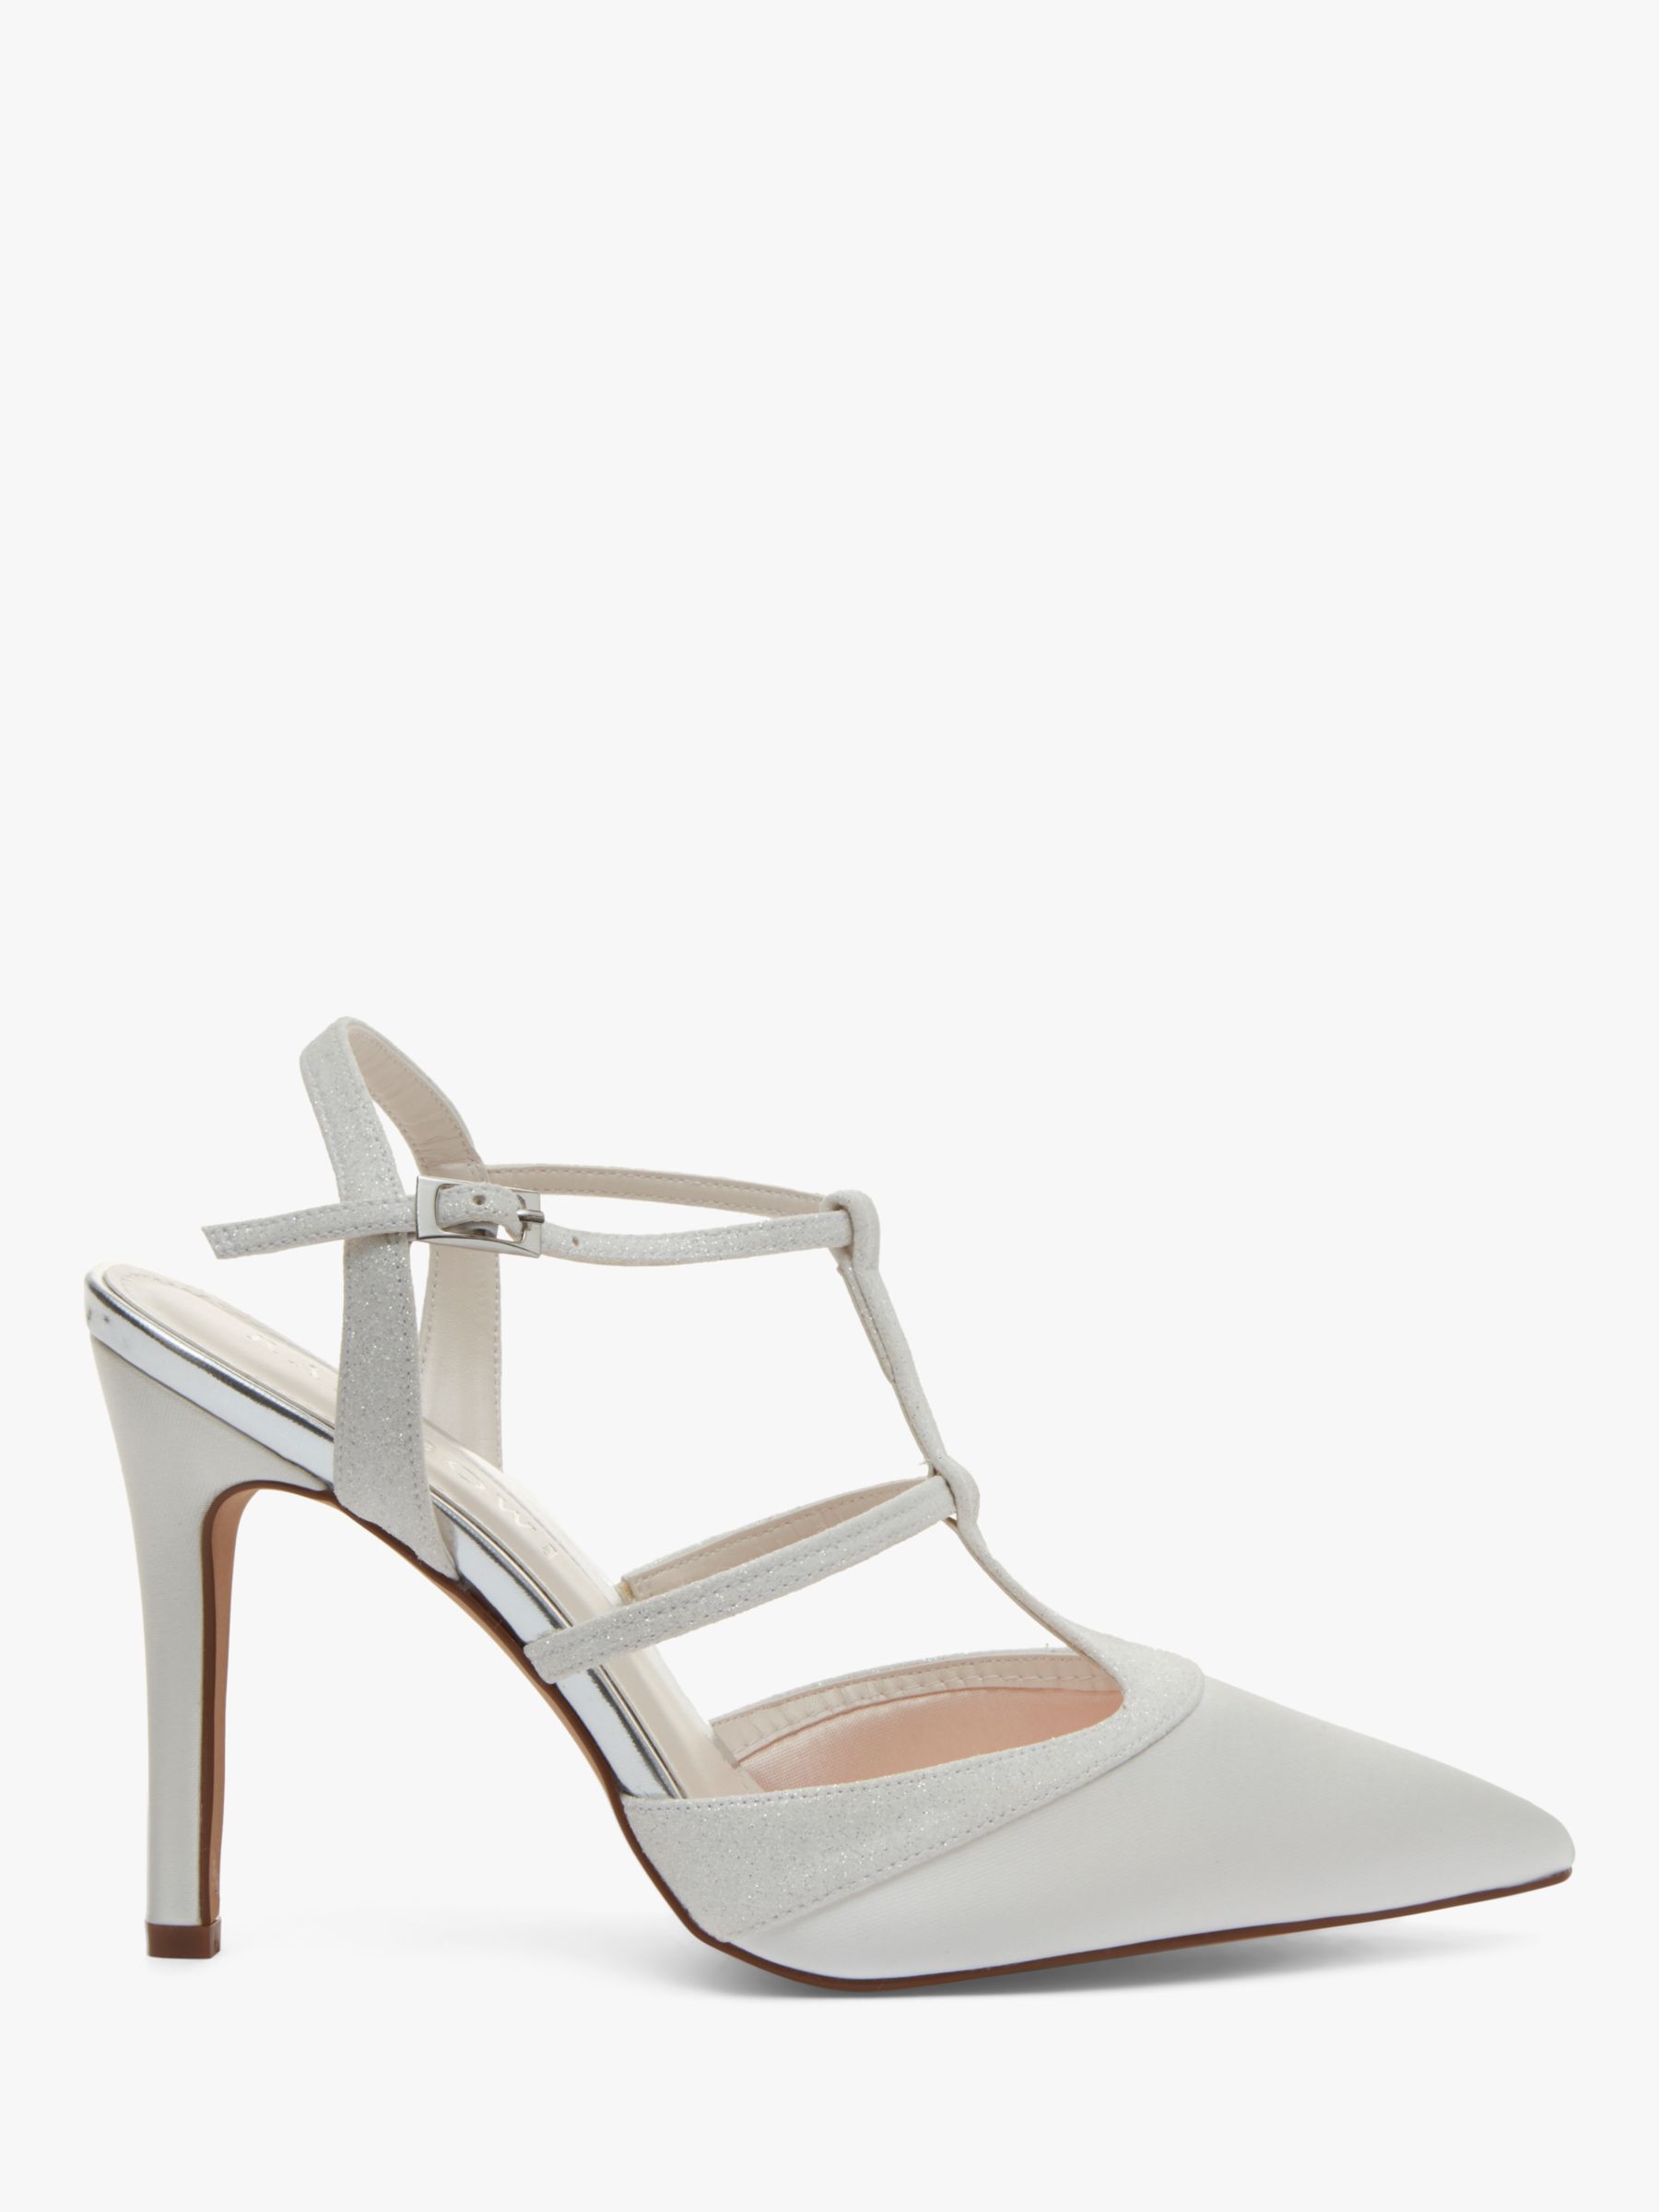 Rainbow Club Rita Satin Strappy Court Shoes, Ivory at John Lewis & Partners